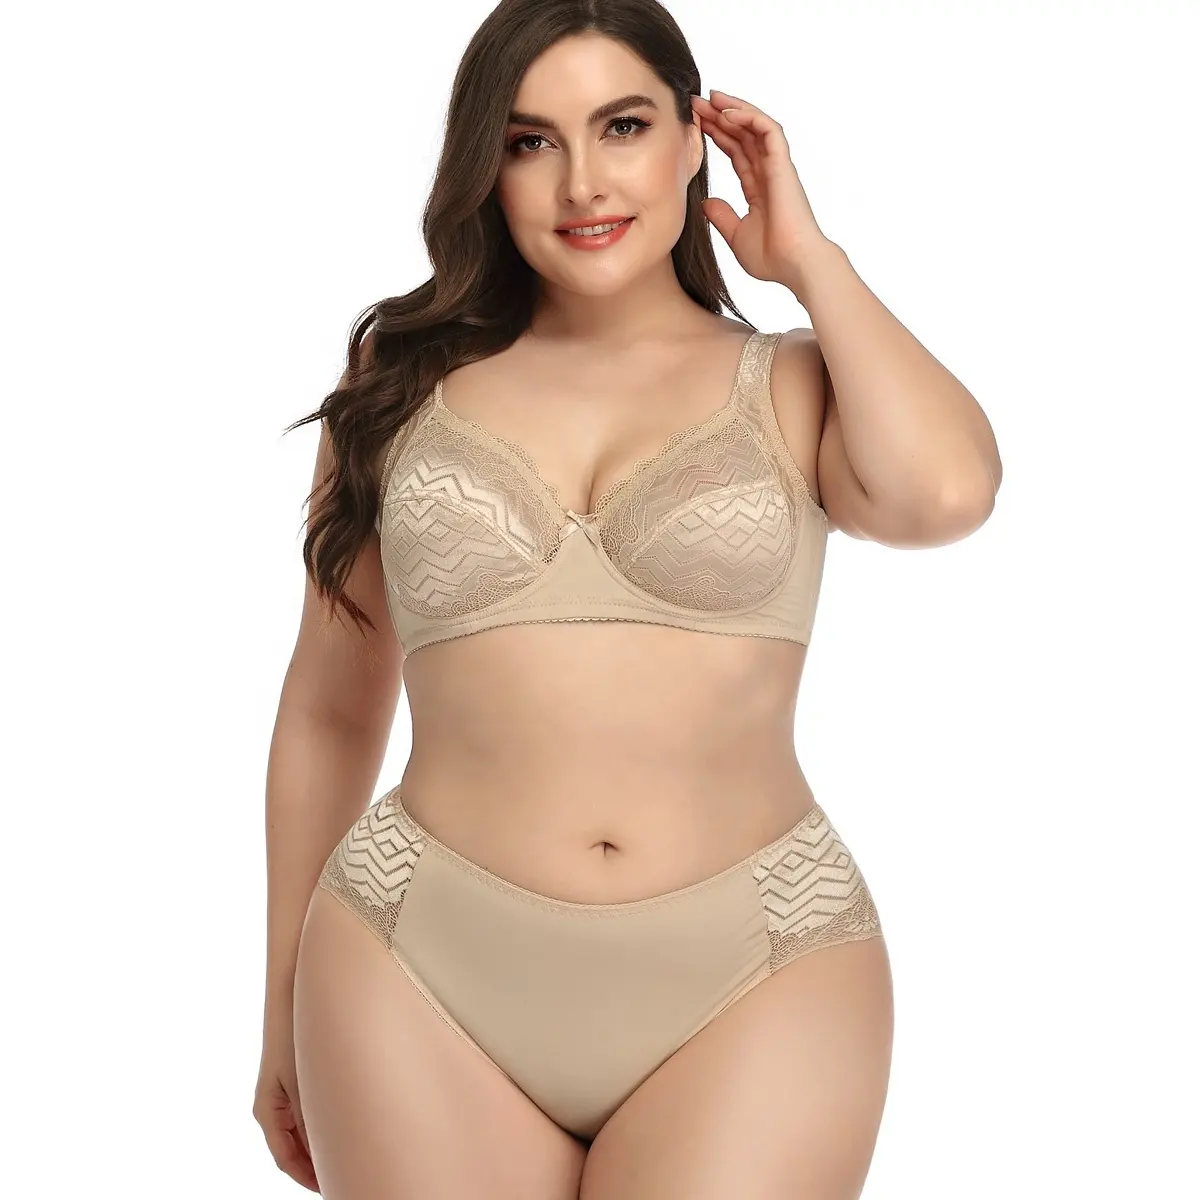 Large Size European American Ultra-Thin Underwear Comfortable Big Cup Bras And Panties Plus Size